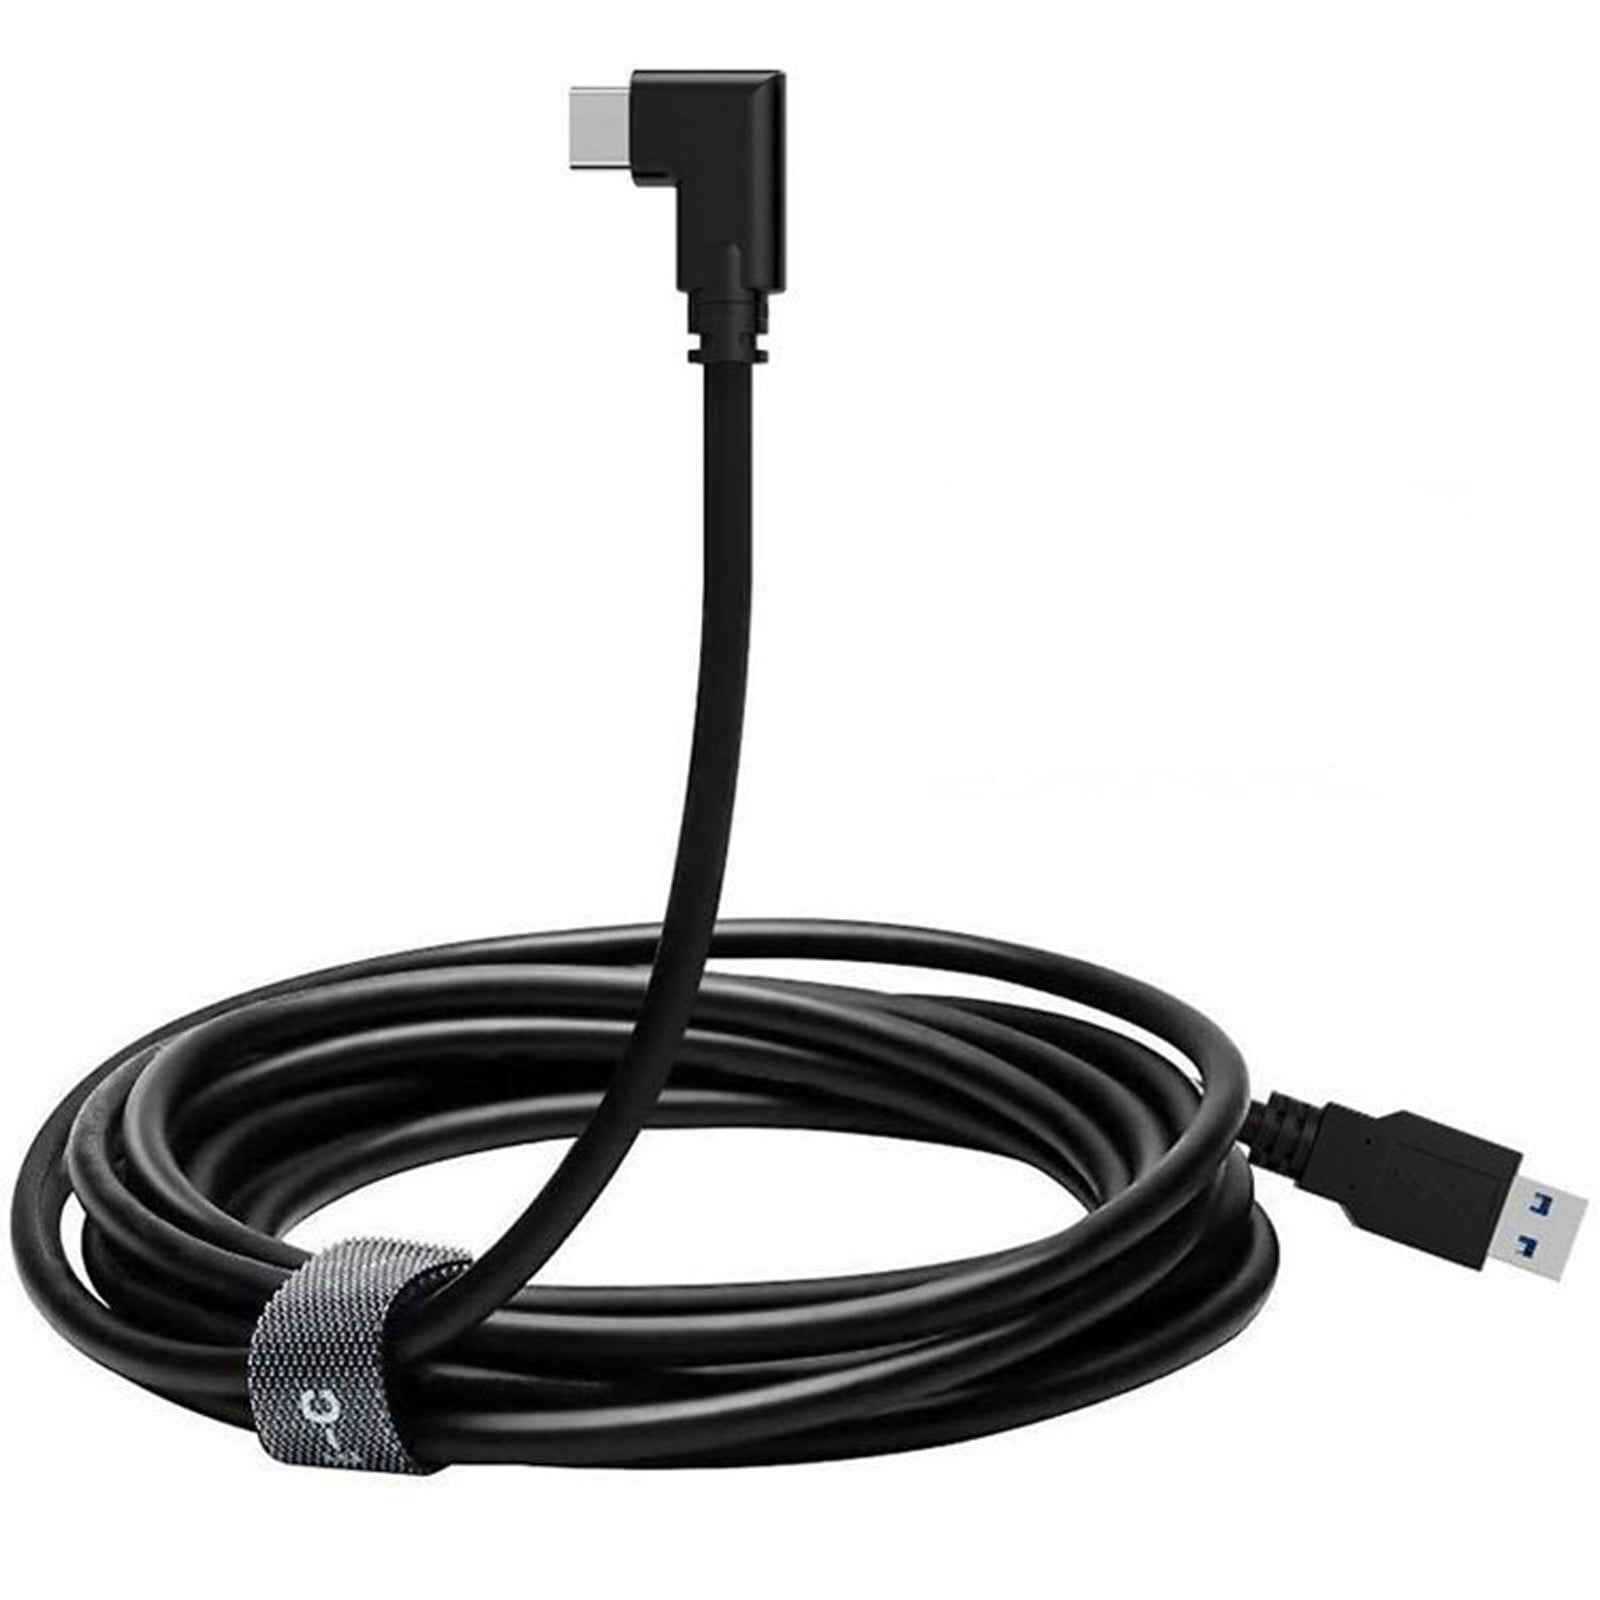 Compatible for Oculus Quest 2 Link Cable 16FT Link Cable for Oculus Quest 2  / Quest 1 / Rift S, USB 3.0 Type A to C High Speed Data Transfer Charging  Cord